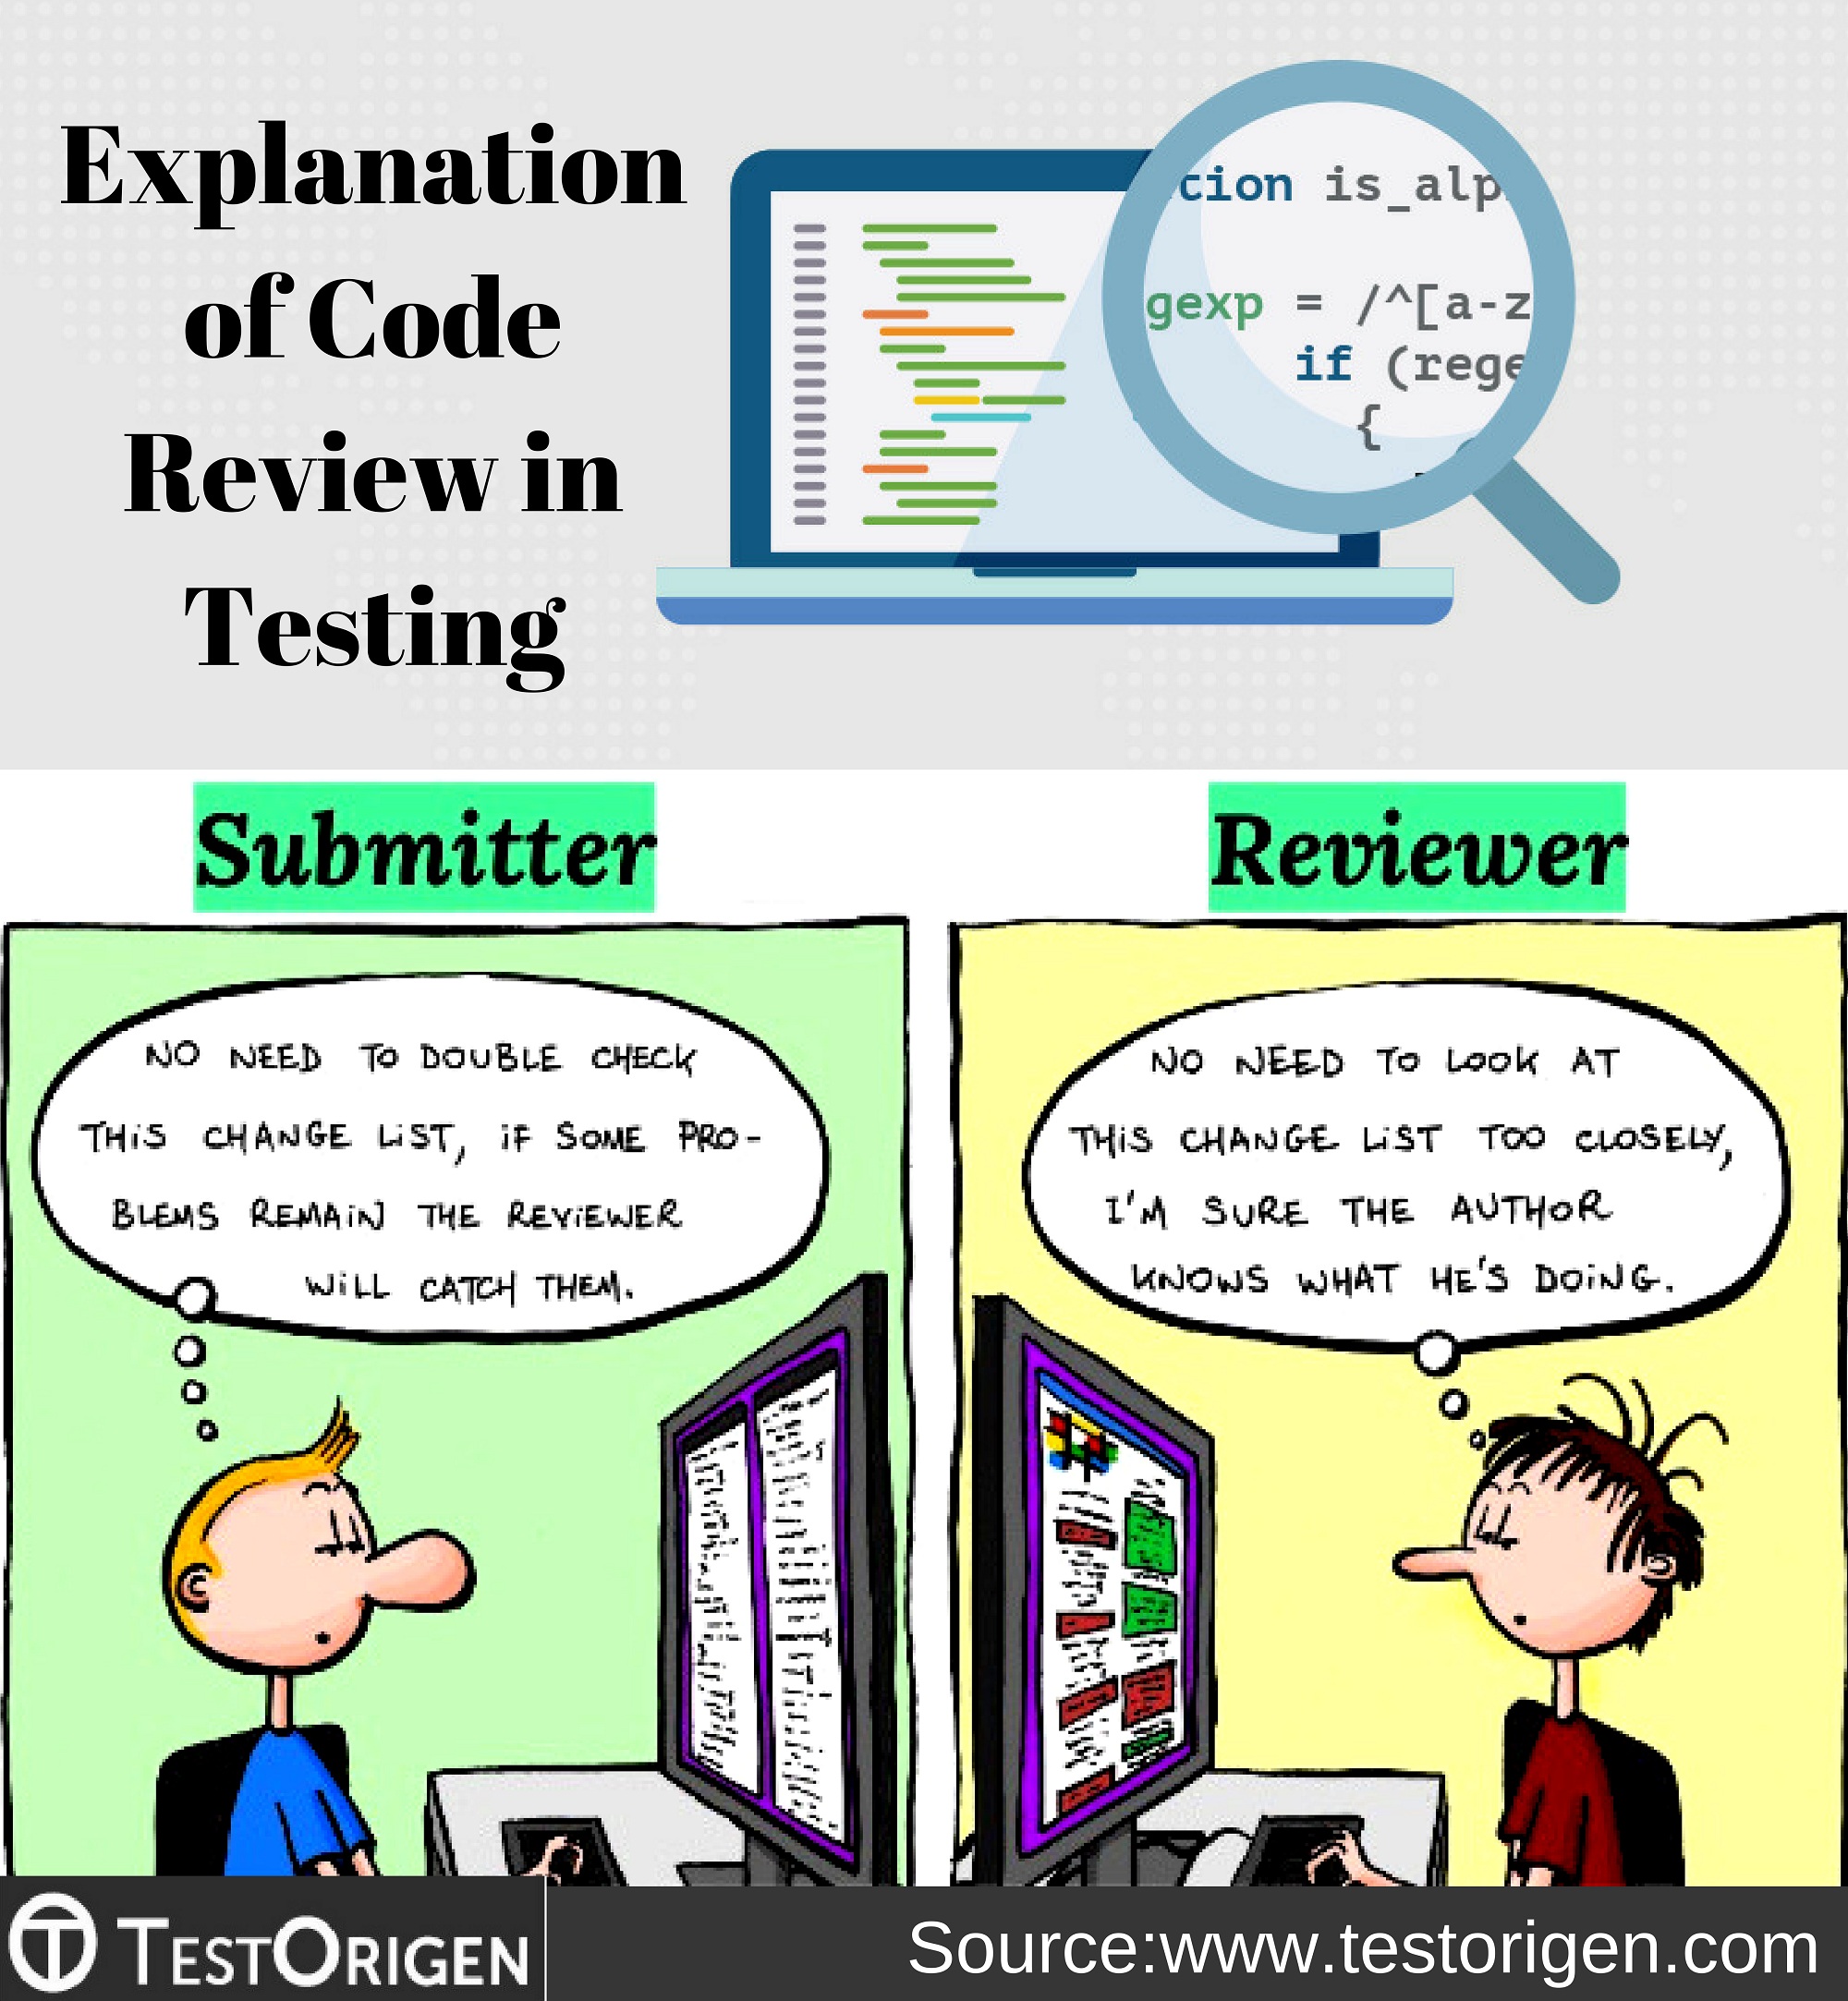 Explanation of Code Review in Testing